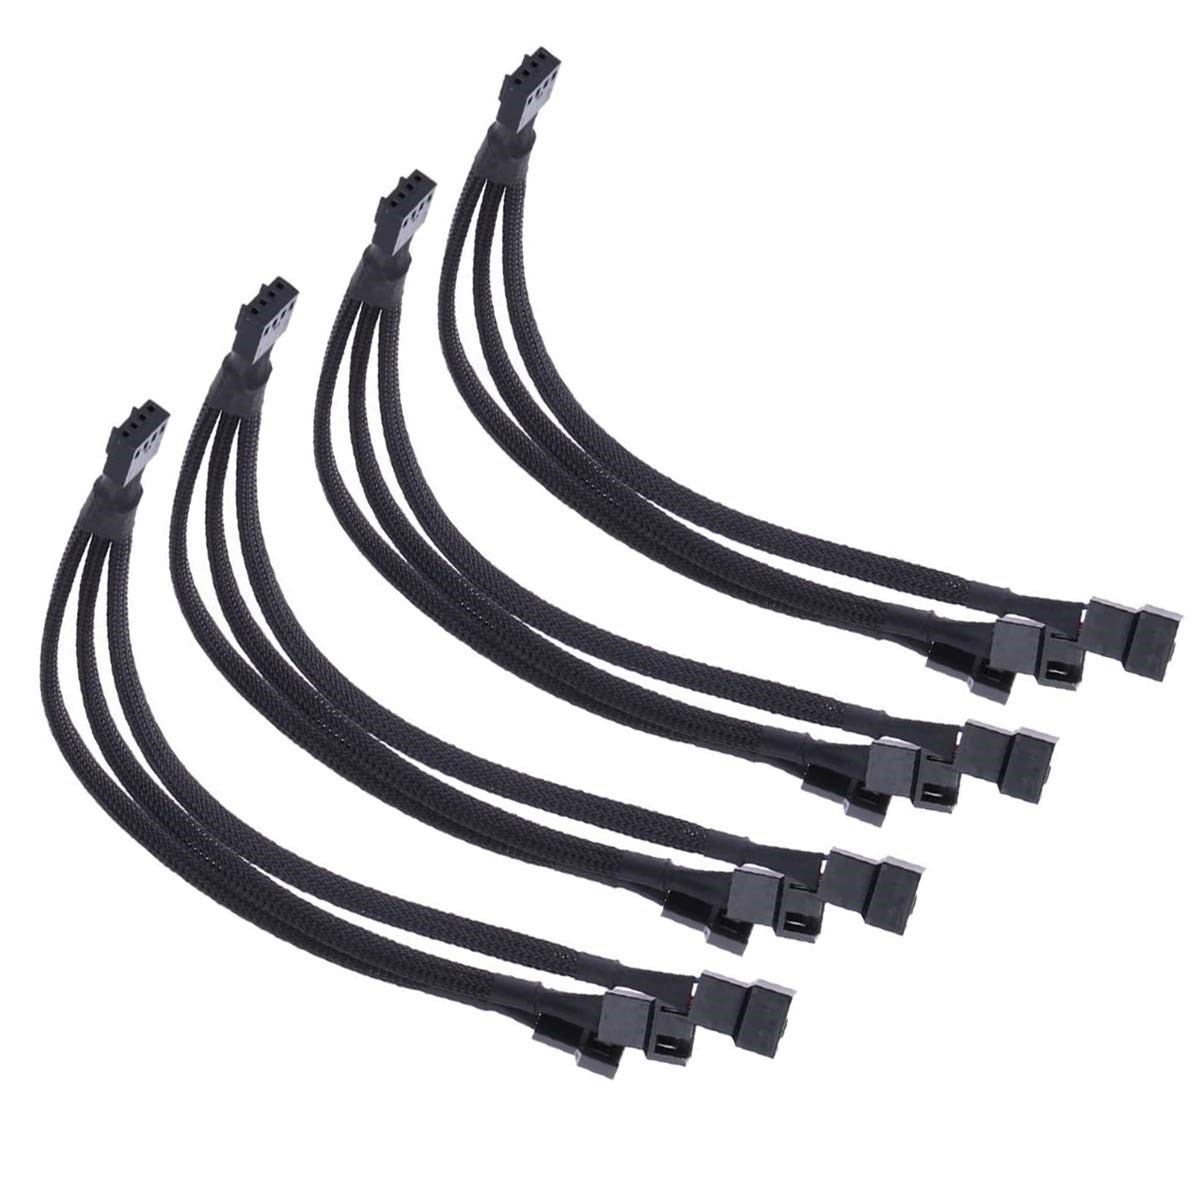 YMWALK 4-pin PWM Fan Cable 1-to-3 Splitter (Pack of 4)